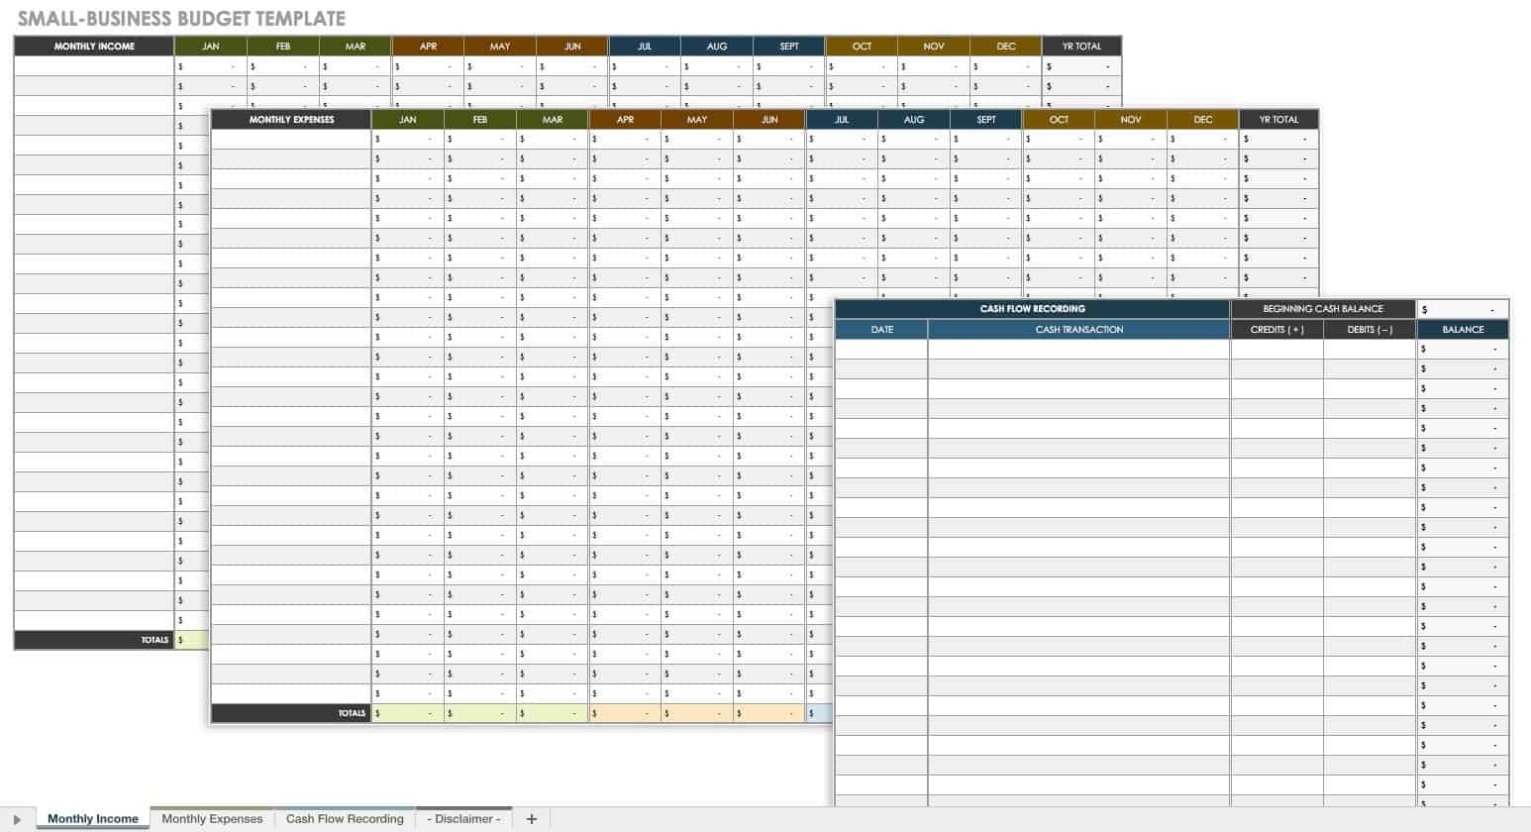 Annual Business Budget Template Excel Database Inside Annual Business Budget Template Excel